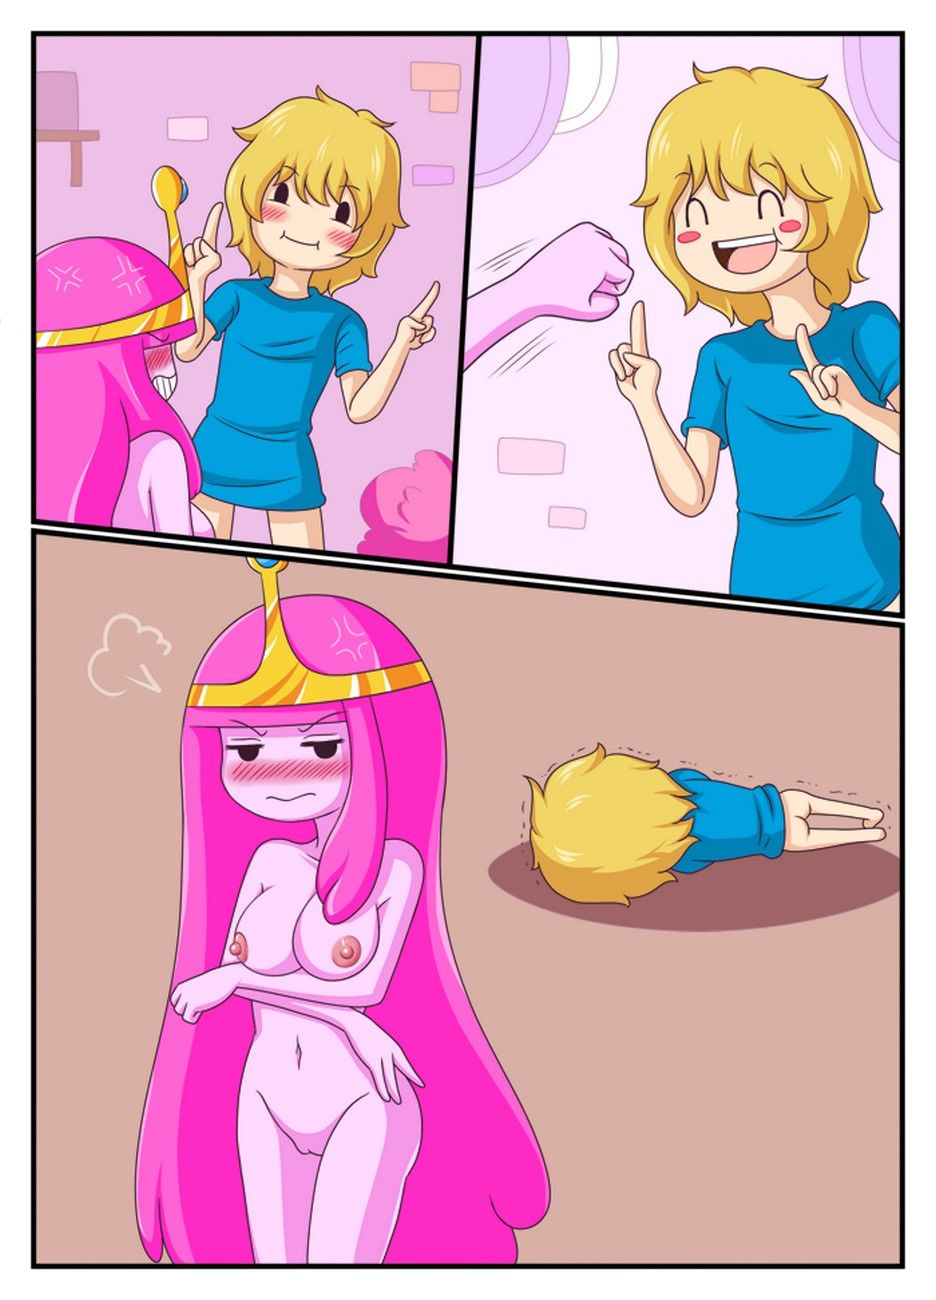 Adventure_Time_-_Adult_Time_1 comix_43527.jpg